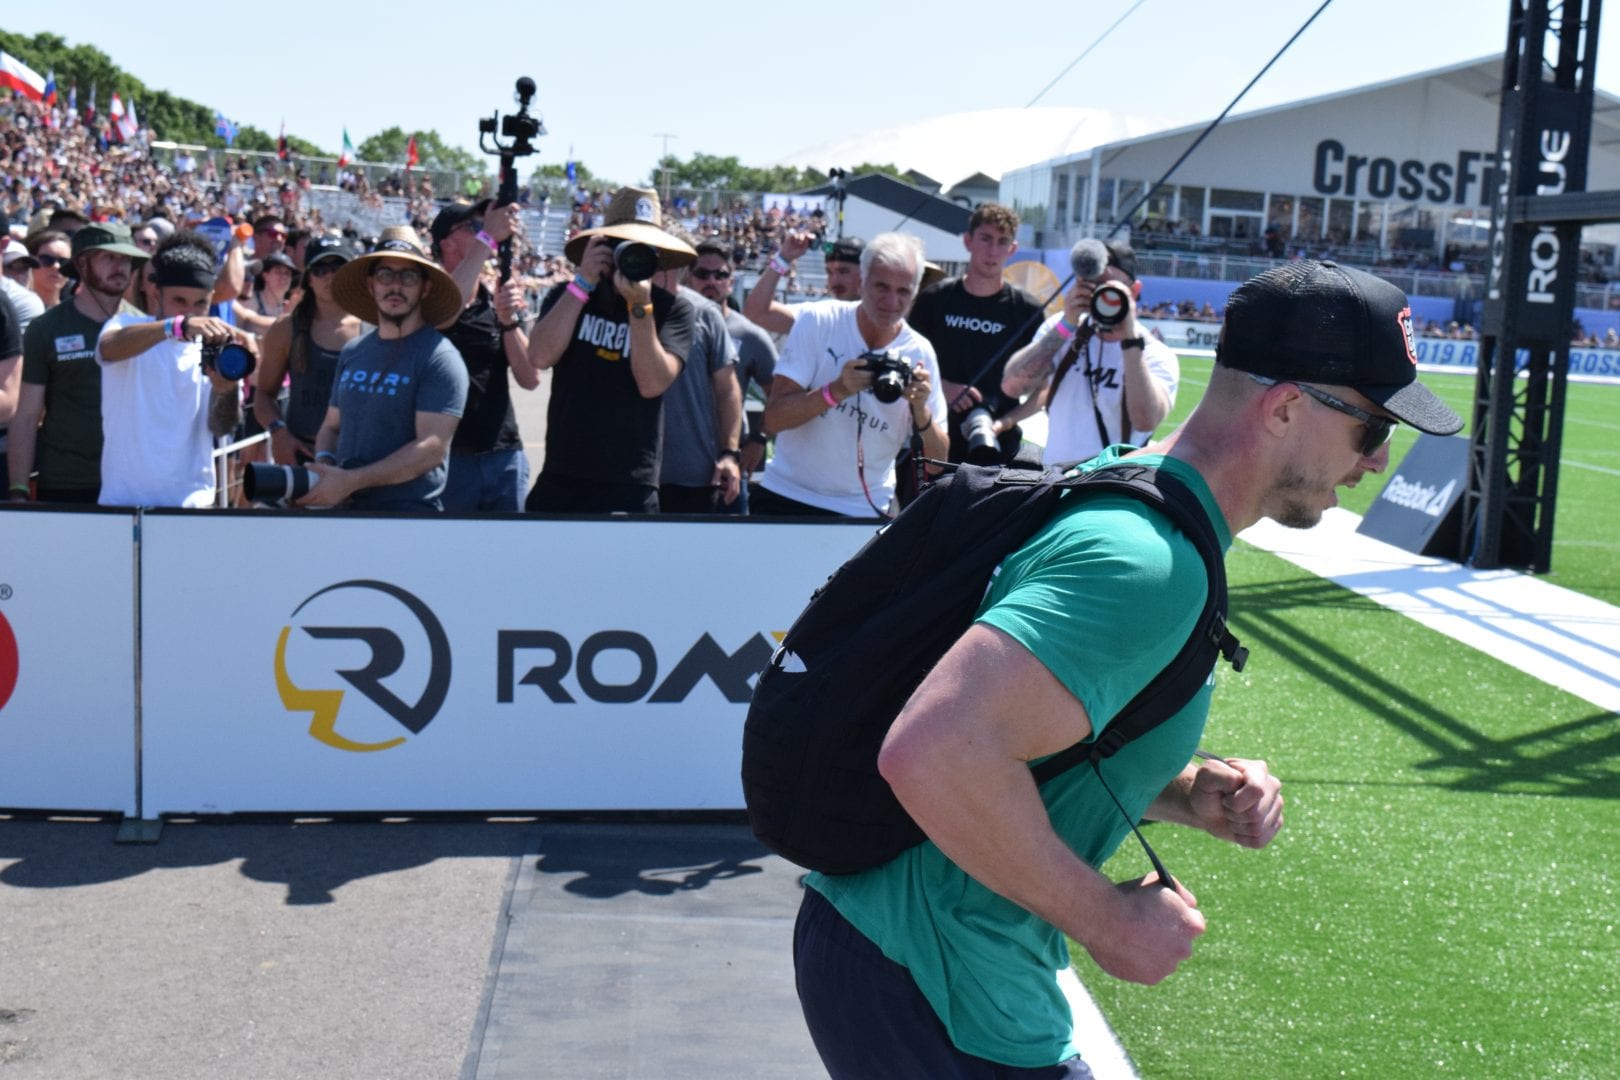 Lukas Högberg of Sweden completes the Ruck Run event at the 2019 CrossFit Games